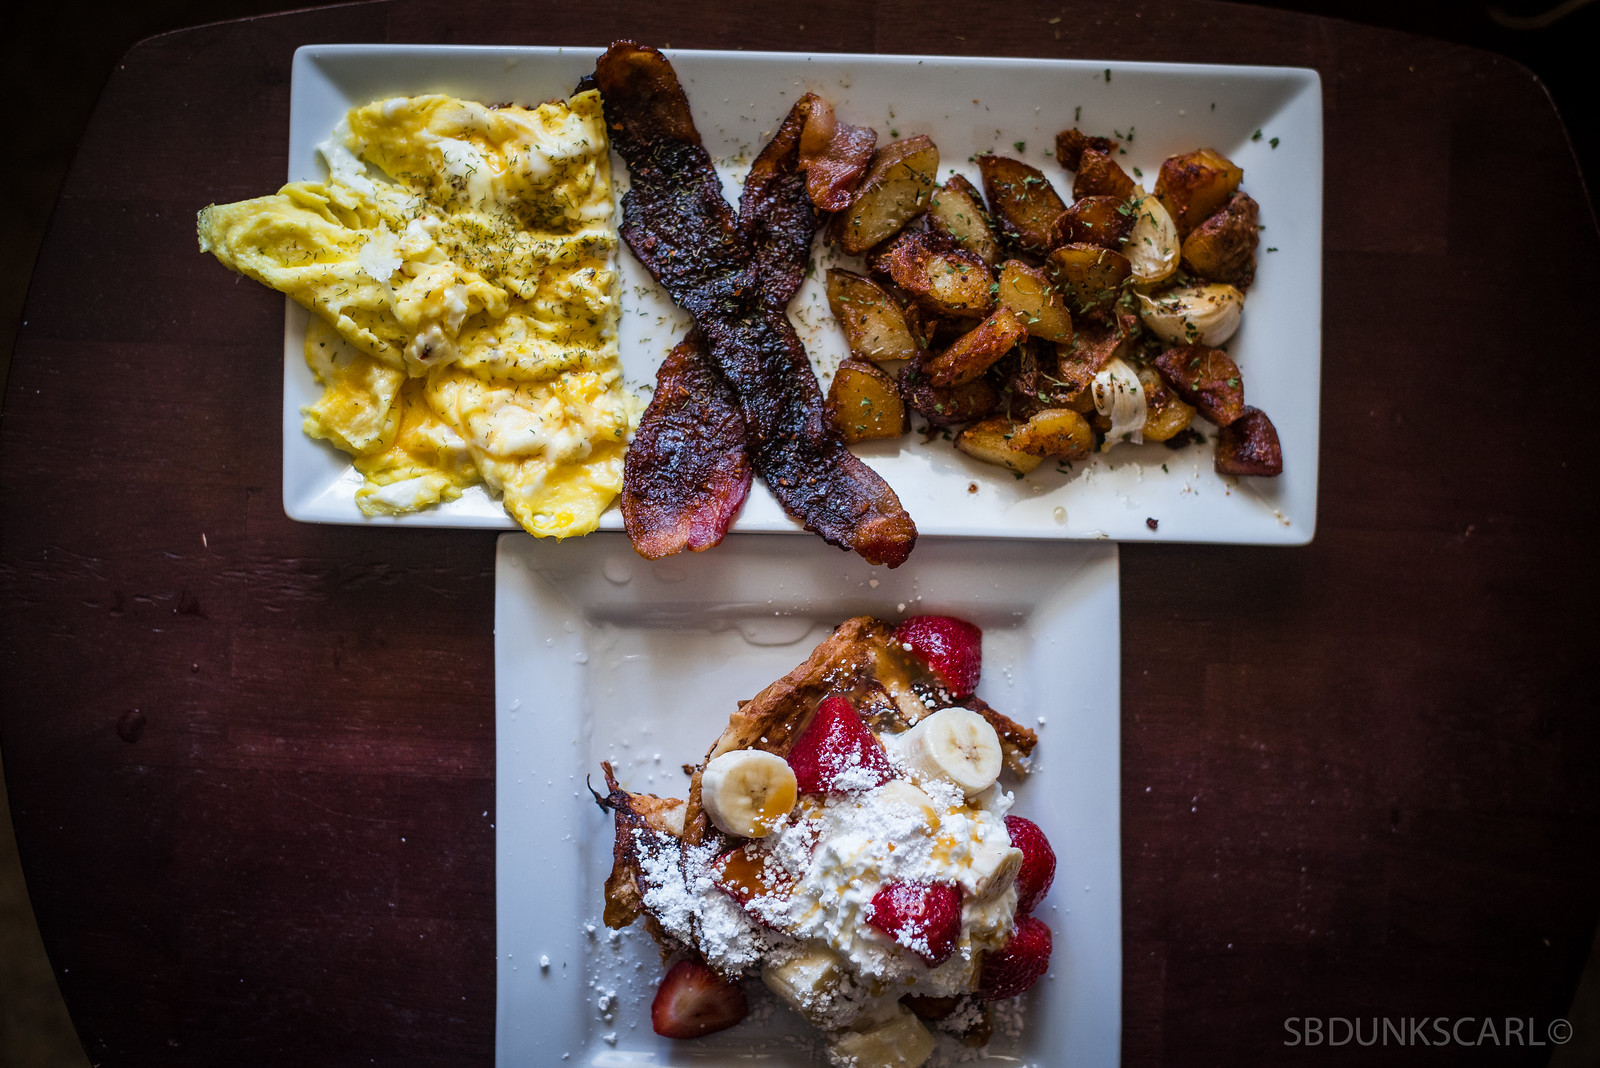 BRUNCH: EGGS WITH DILL WEED, BROWN SUGER BACON AND HOUSE FRIES